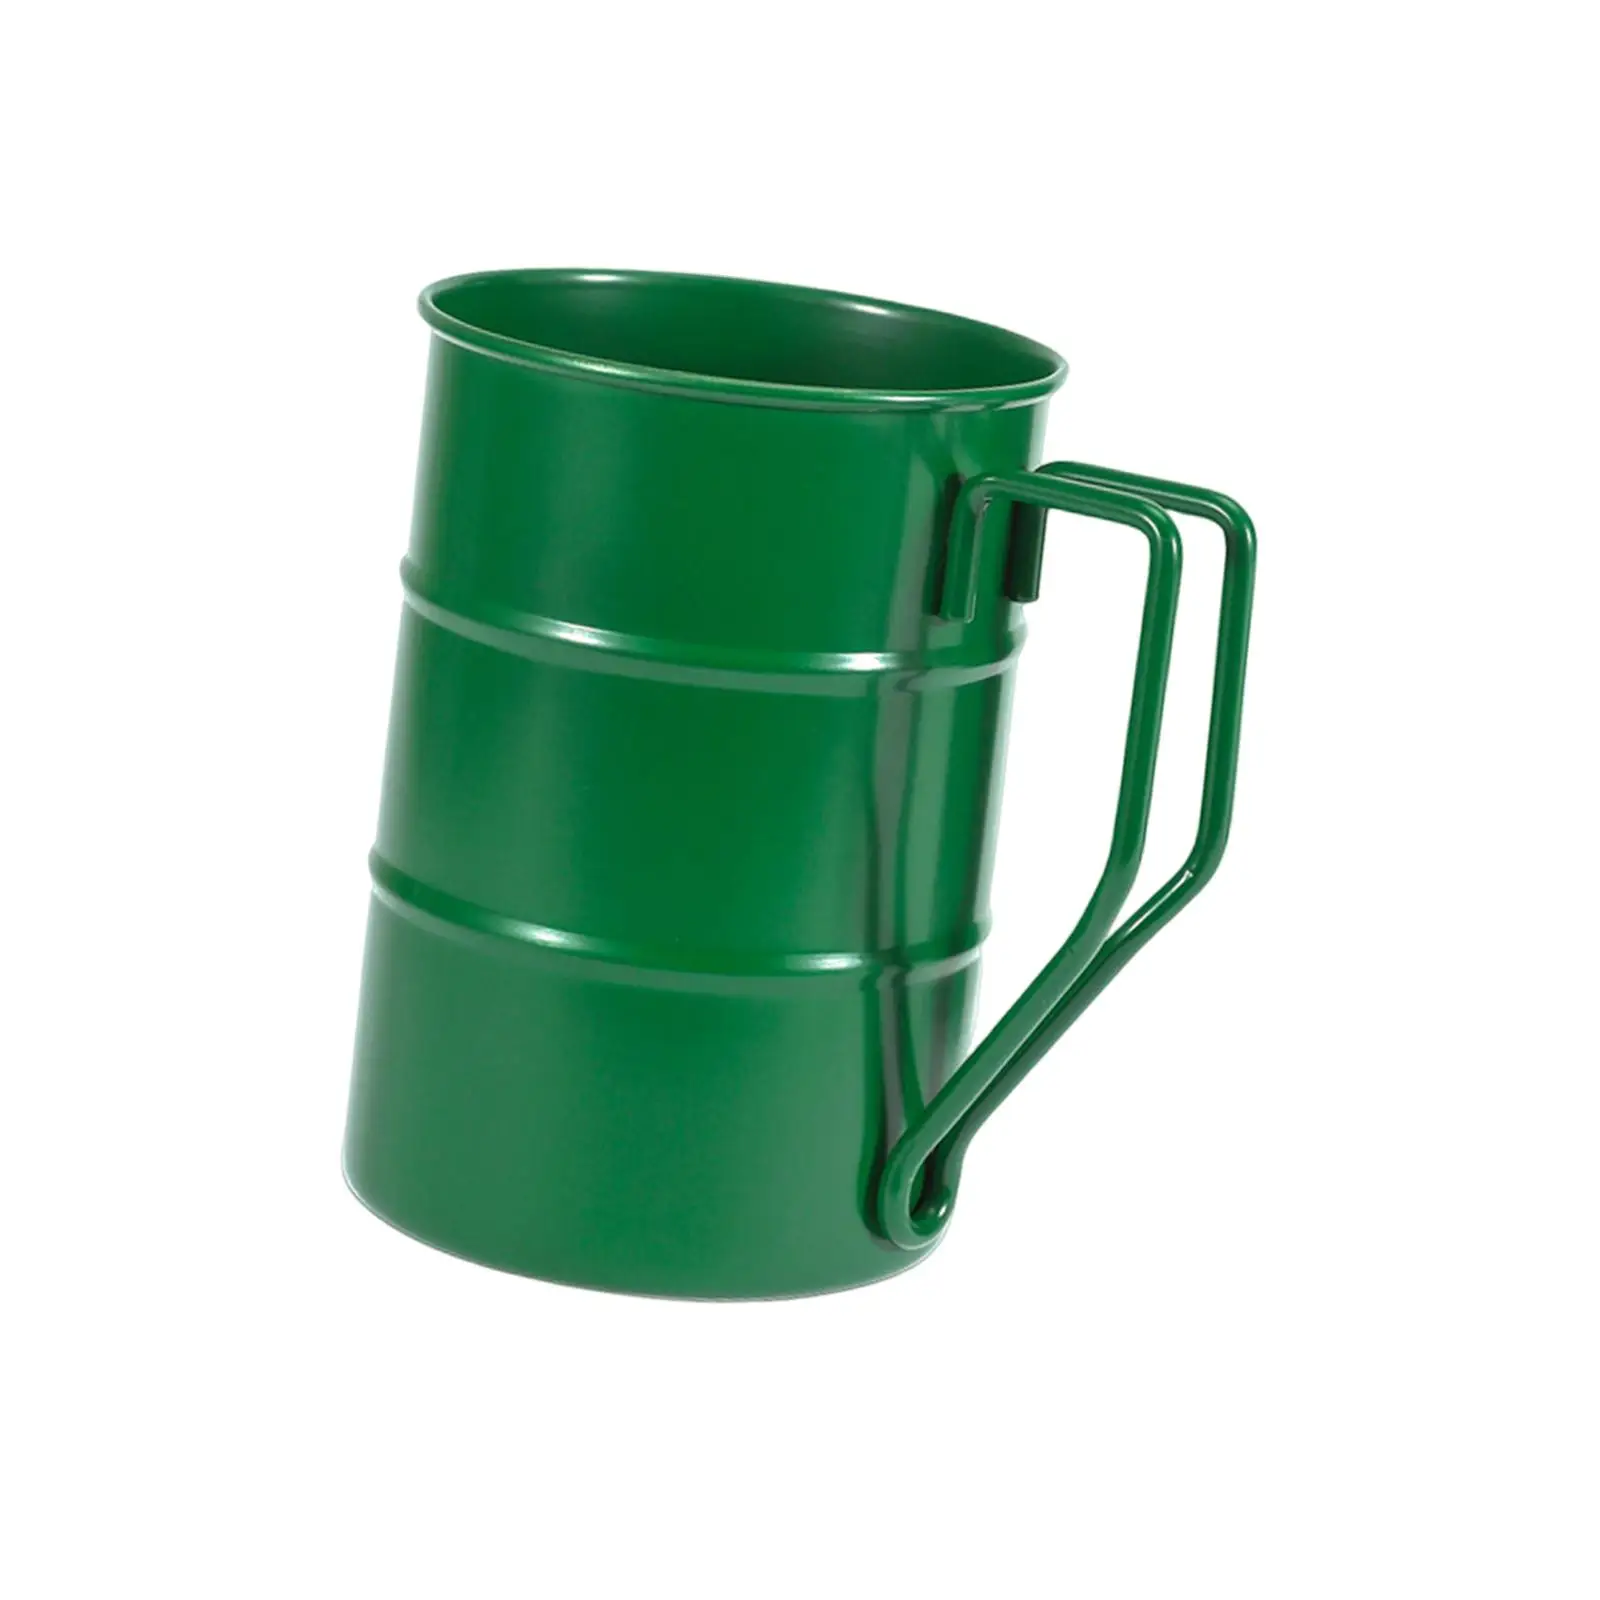 Outdoor Camping Cup with Handle Coffee Mug for Travel Cooking Touring Trips